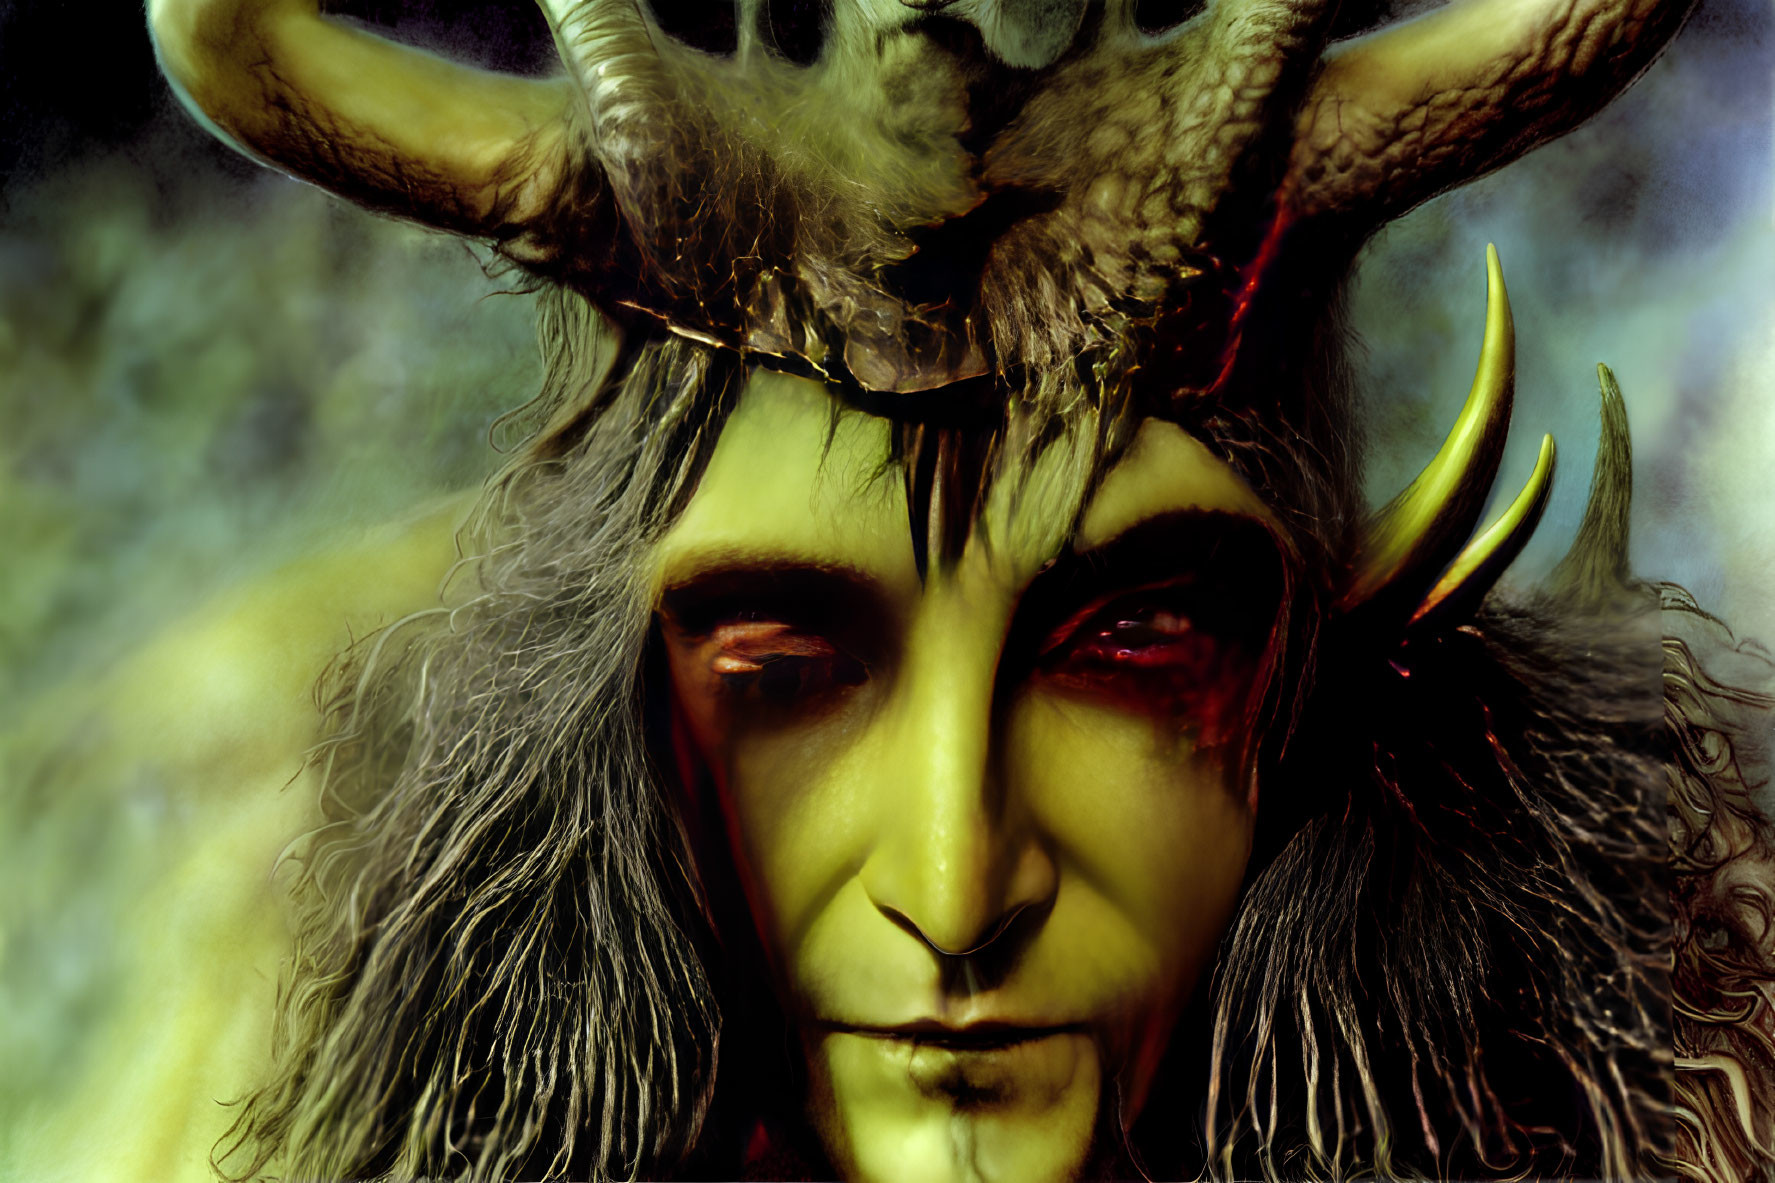 Fantastical creature with horns, pointed ears, red eyes, greenish skin, and wild hair